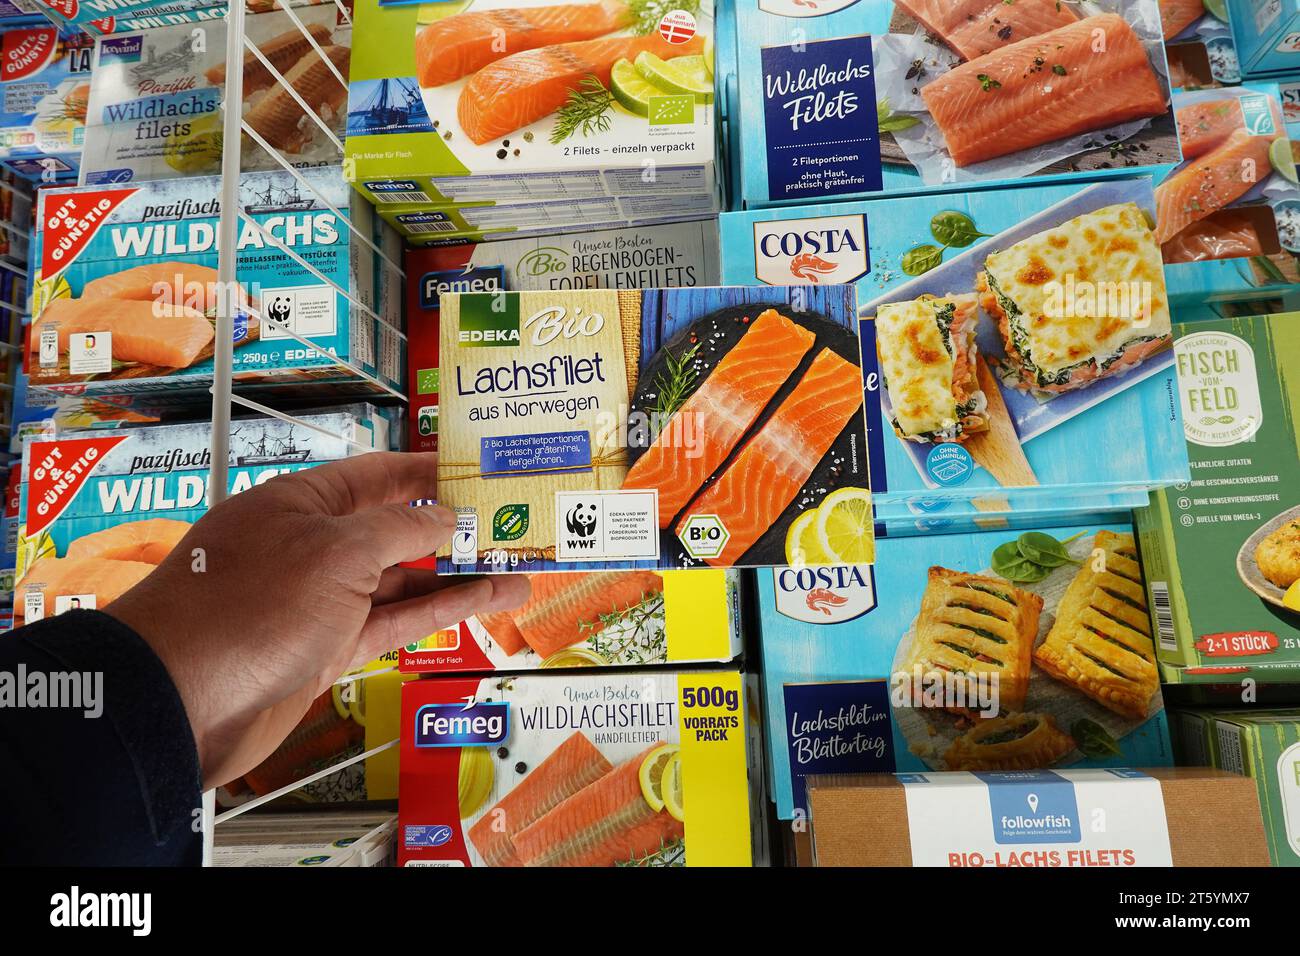 Frozen Bio label fish in a Grocery Stock Photo